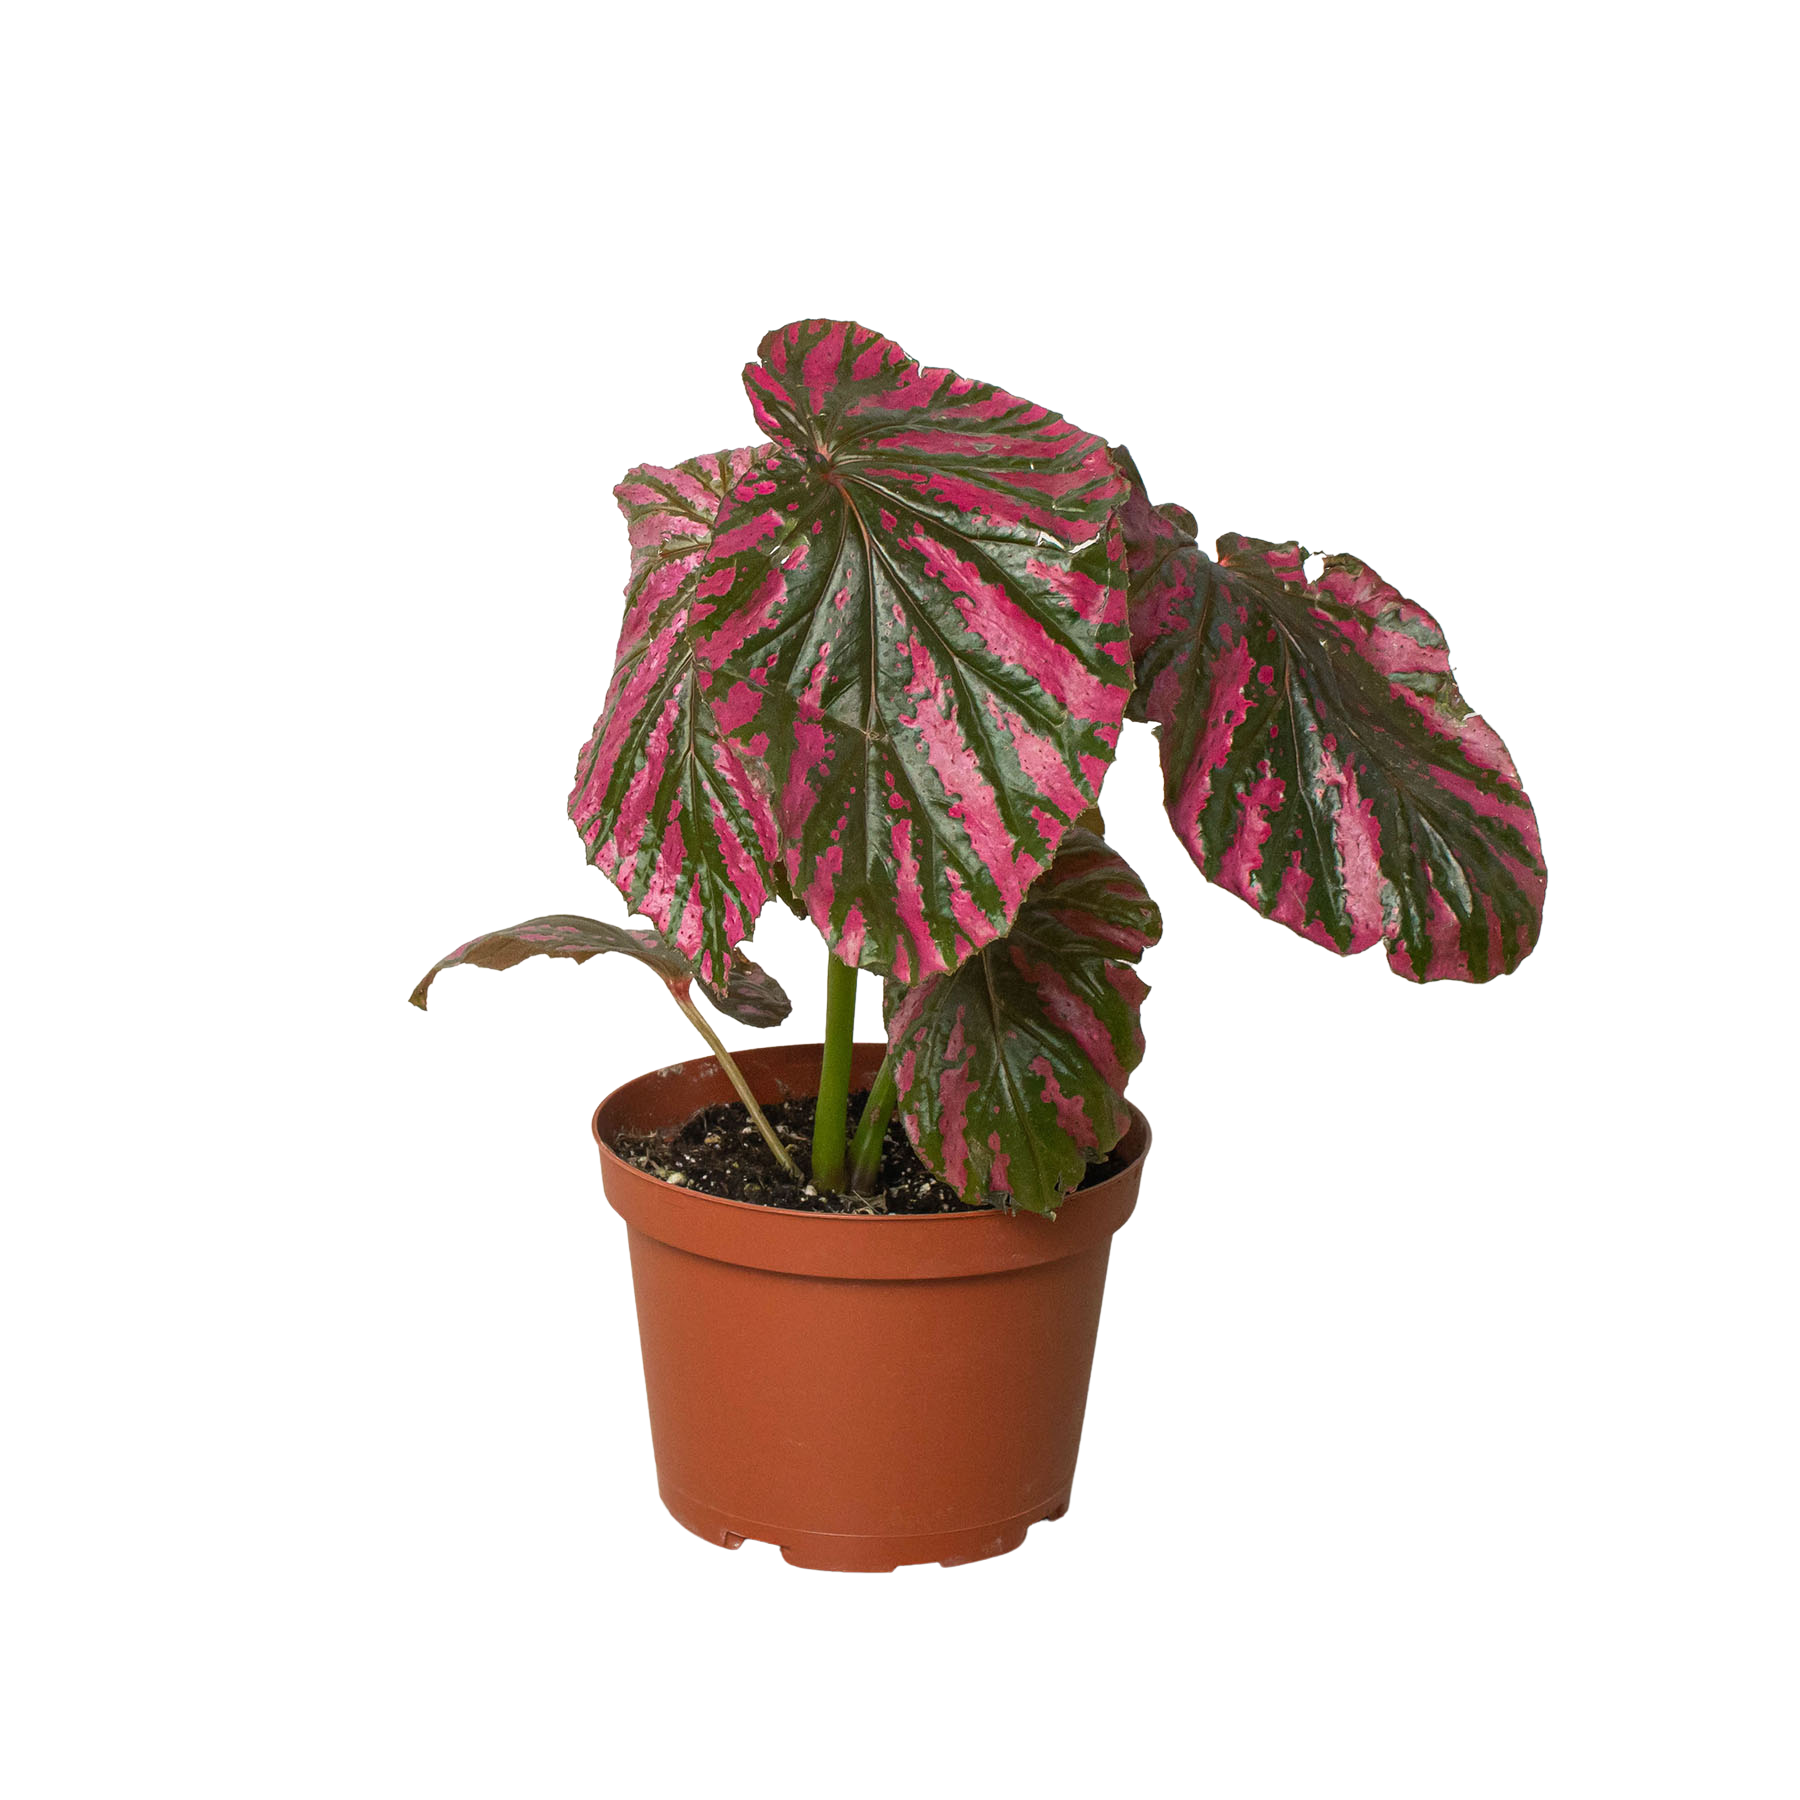 A pink and red plant in a pot on a white background at one of the top plant nurseries near me.